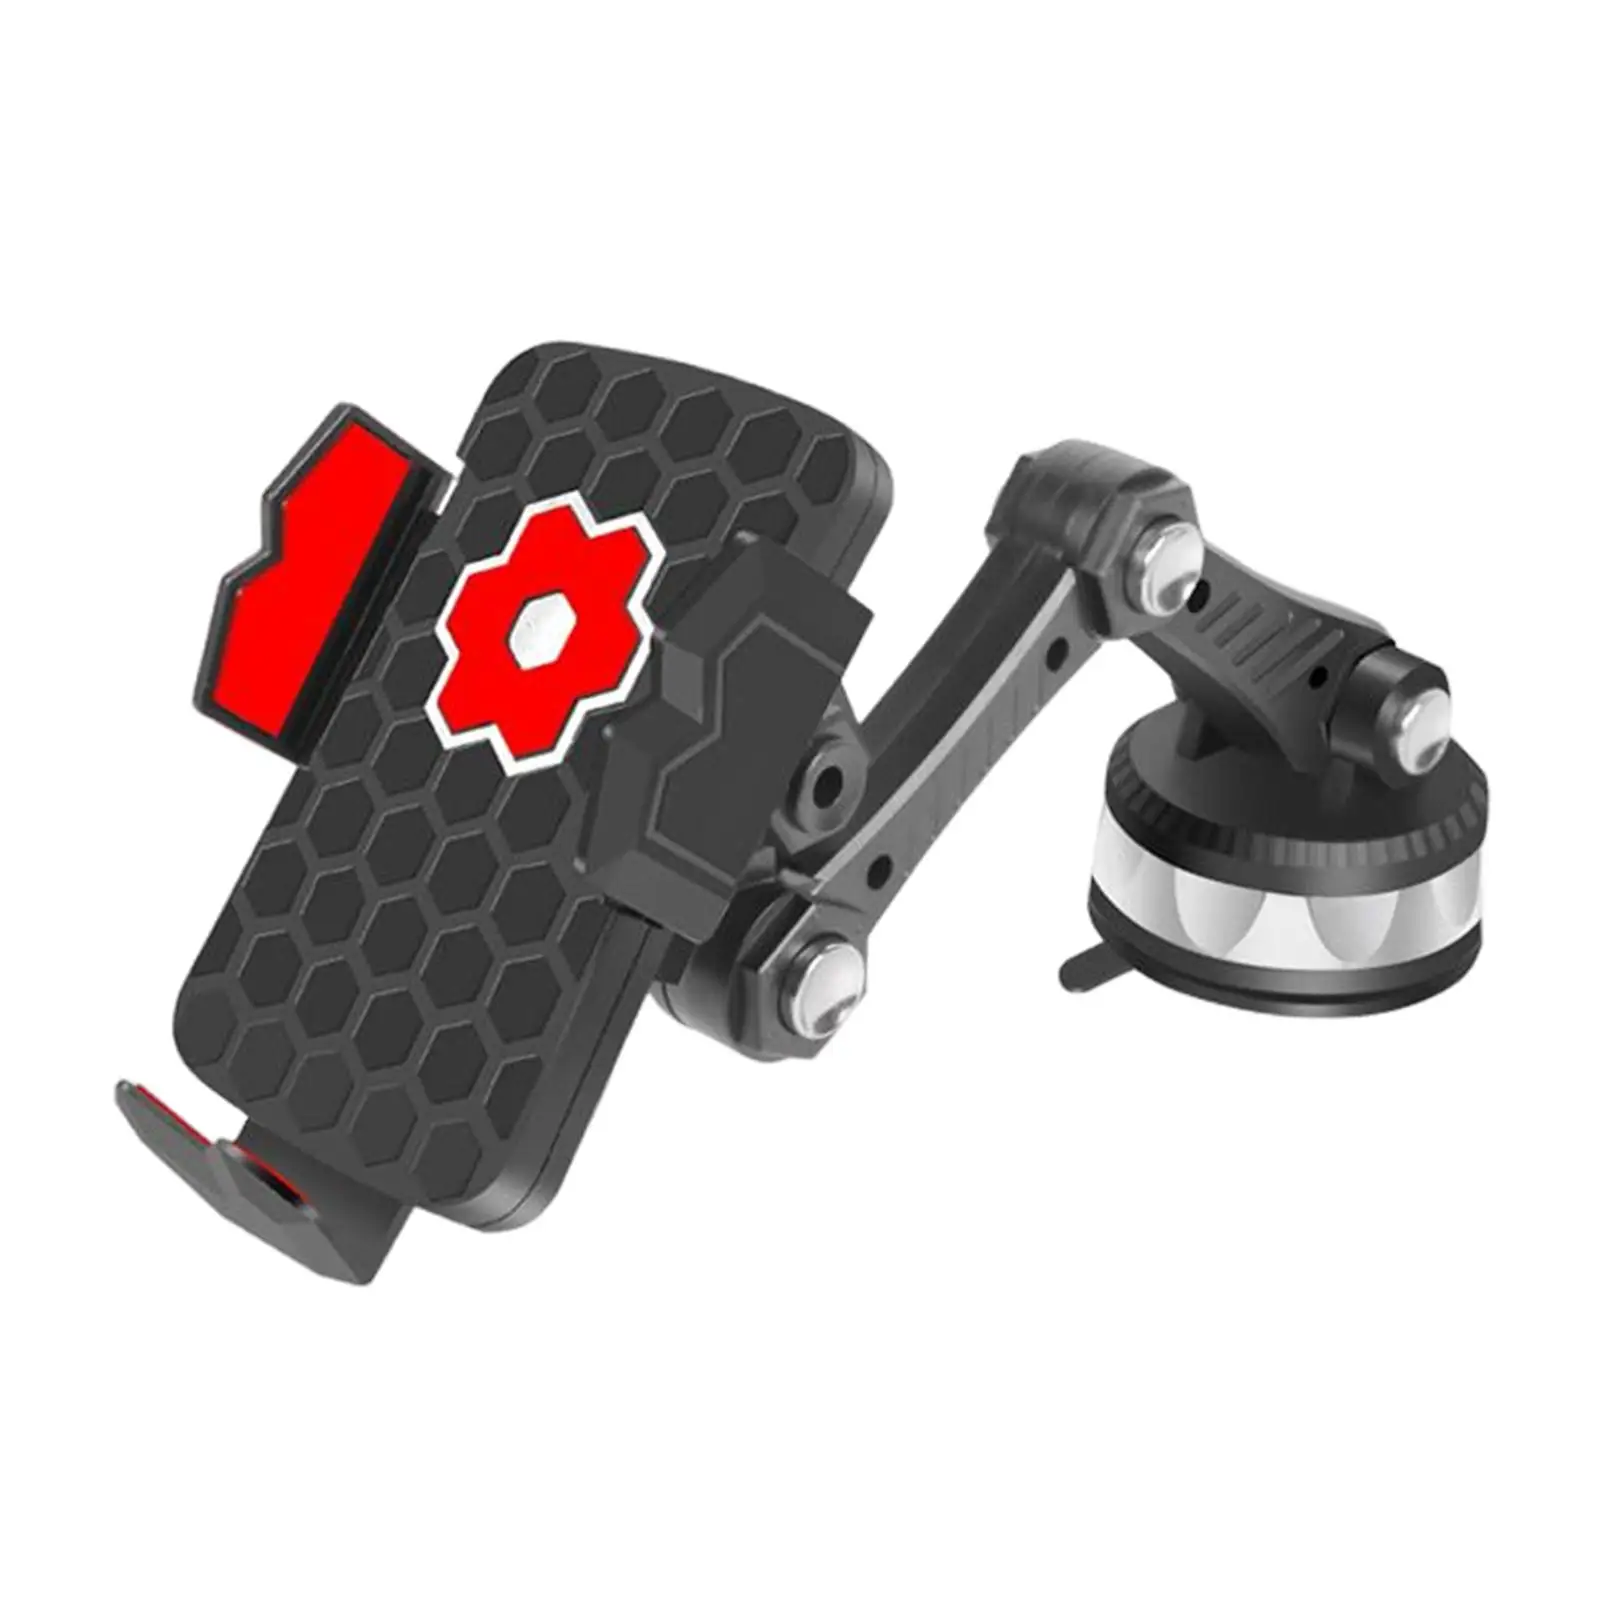 Powerful Suction Cup Phone Holder Scratchproof Smartphone Holder Stand Universal Windshield for Vehicle 4.7-7.2in Phones